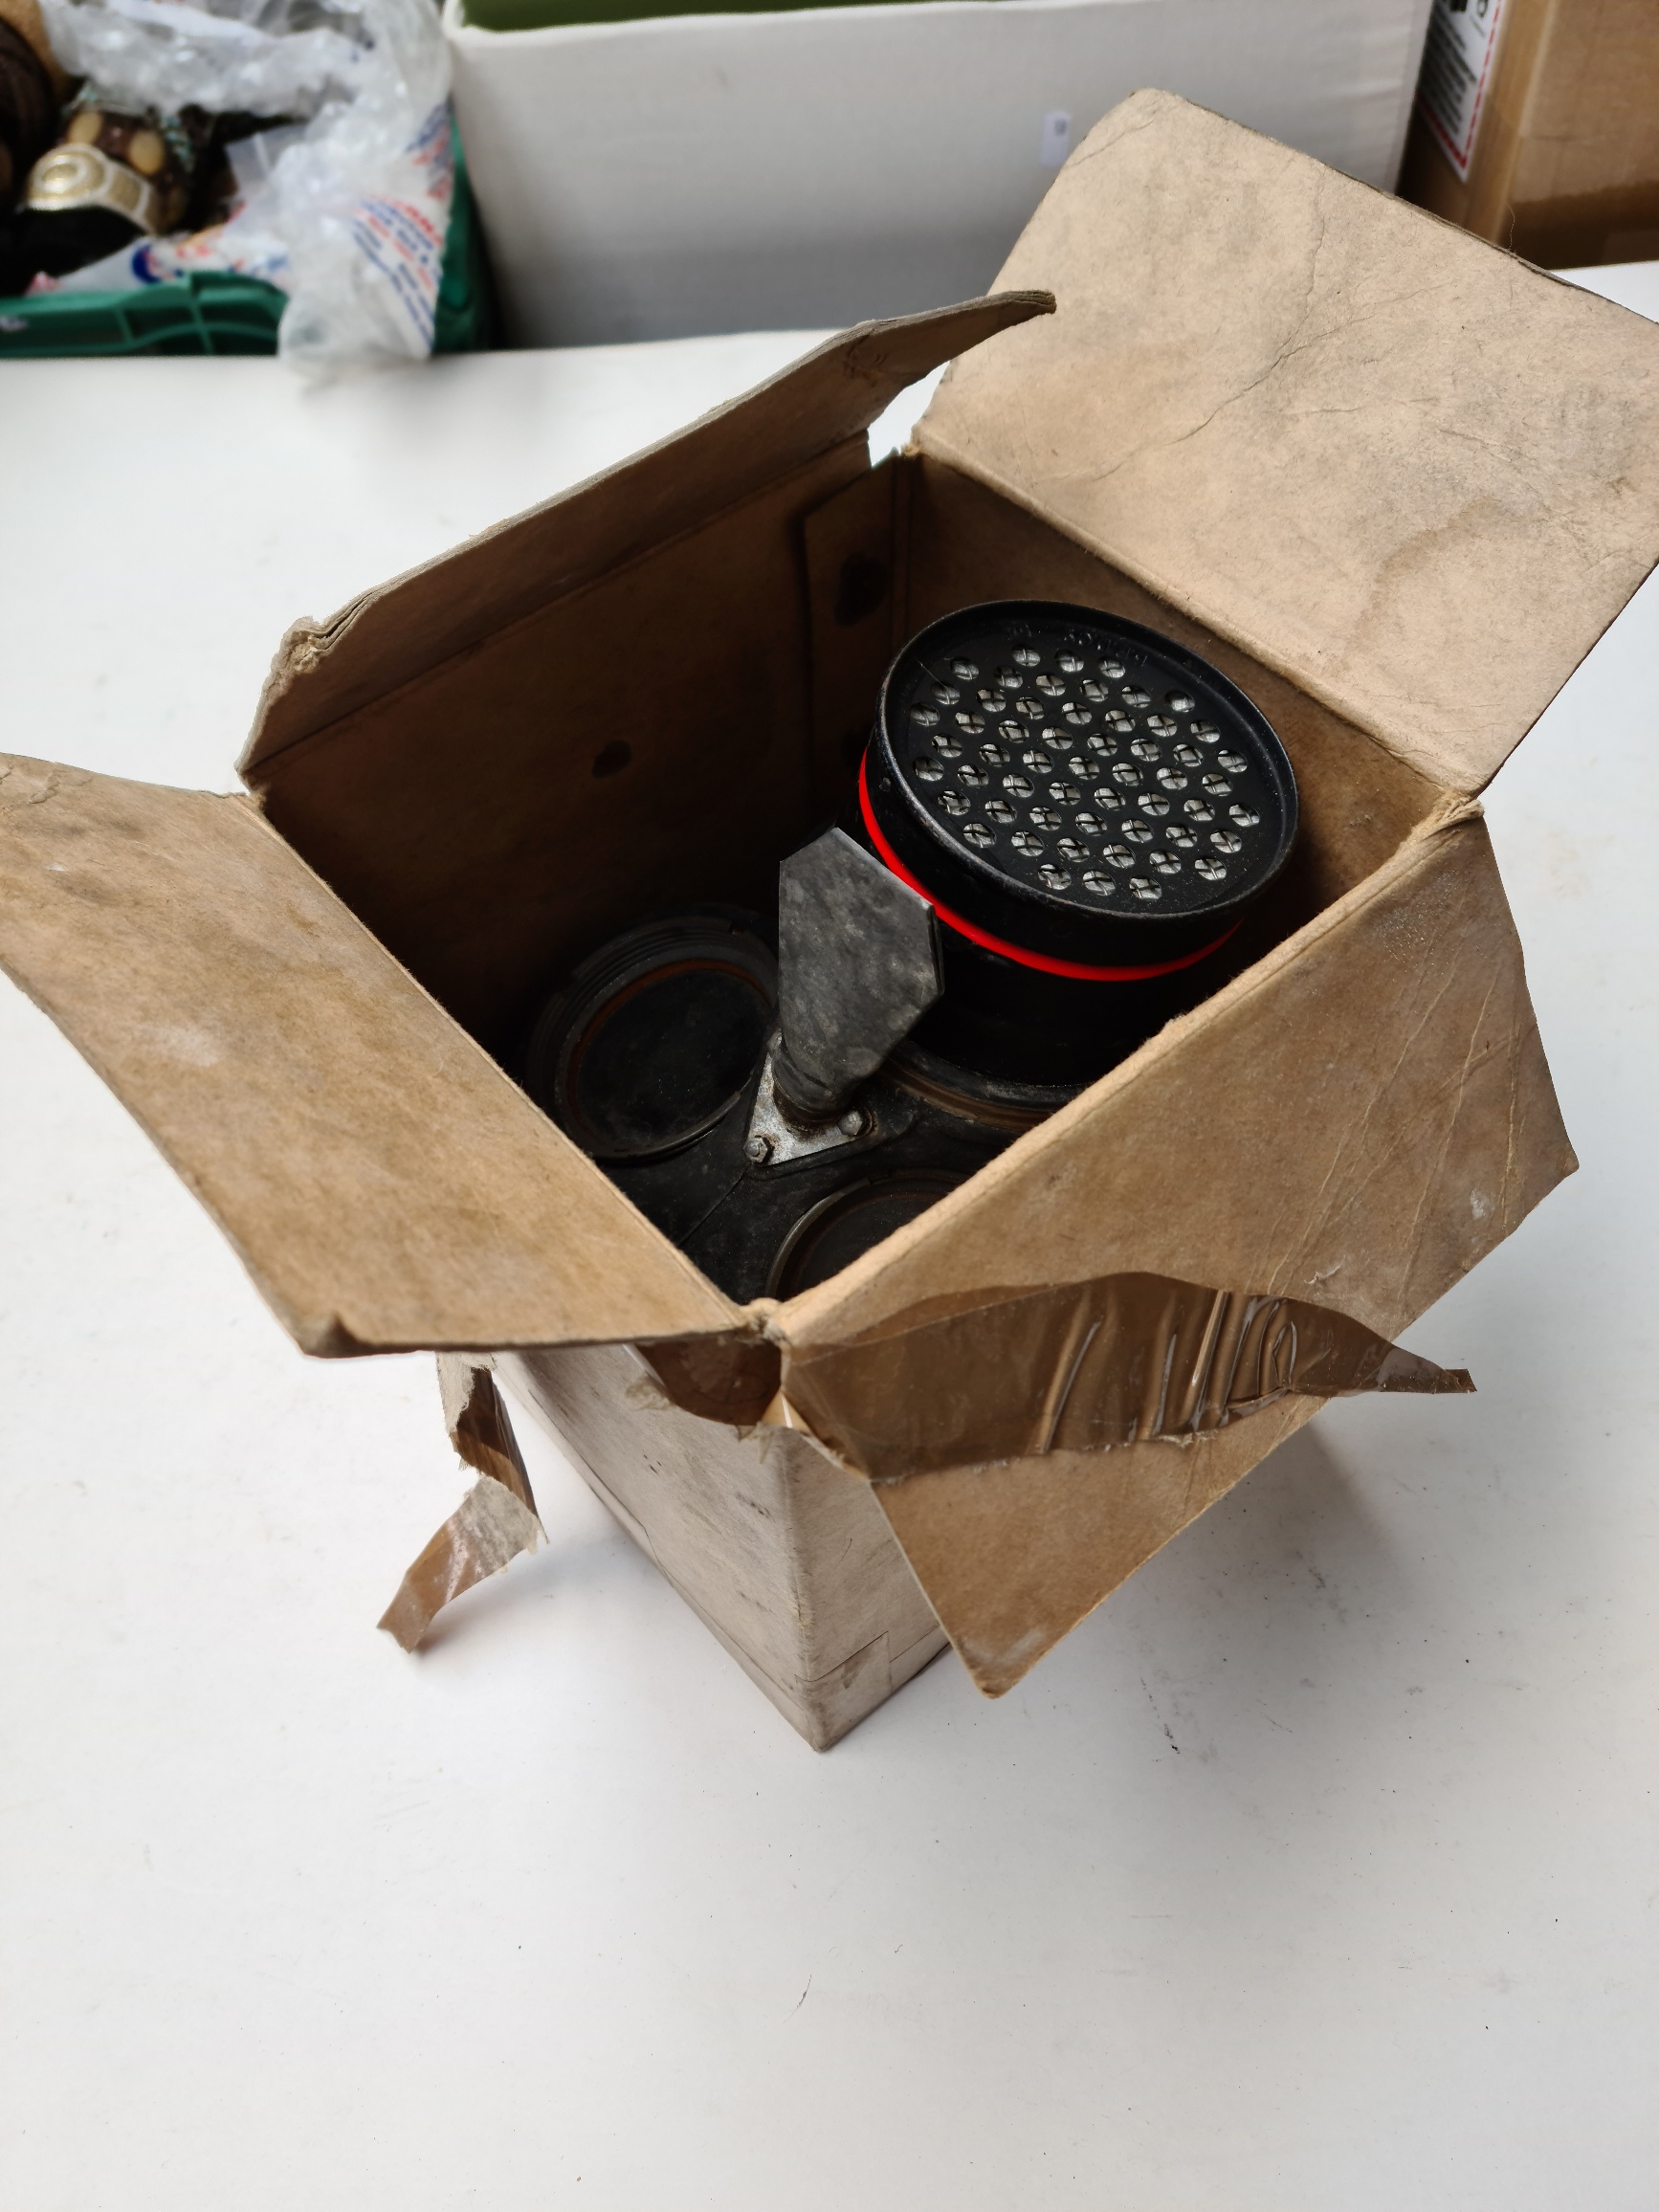 WW2 gas mask in box. - Image 6 of 8